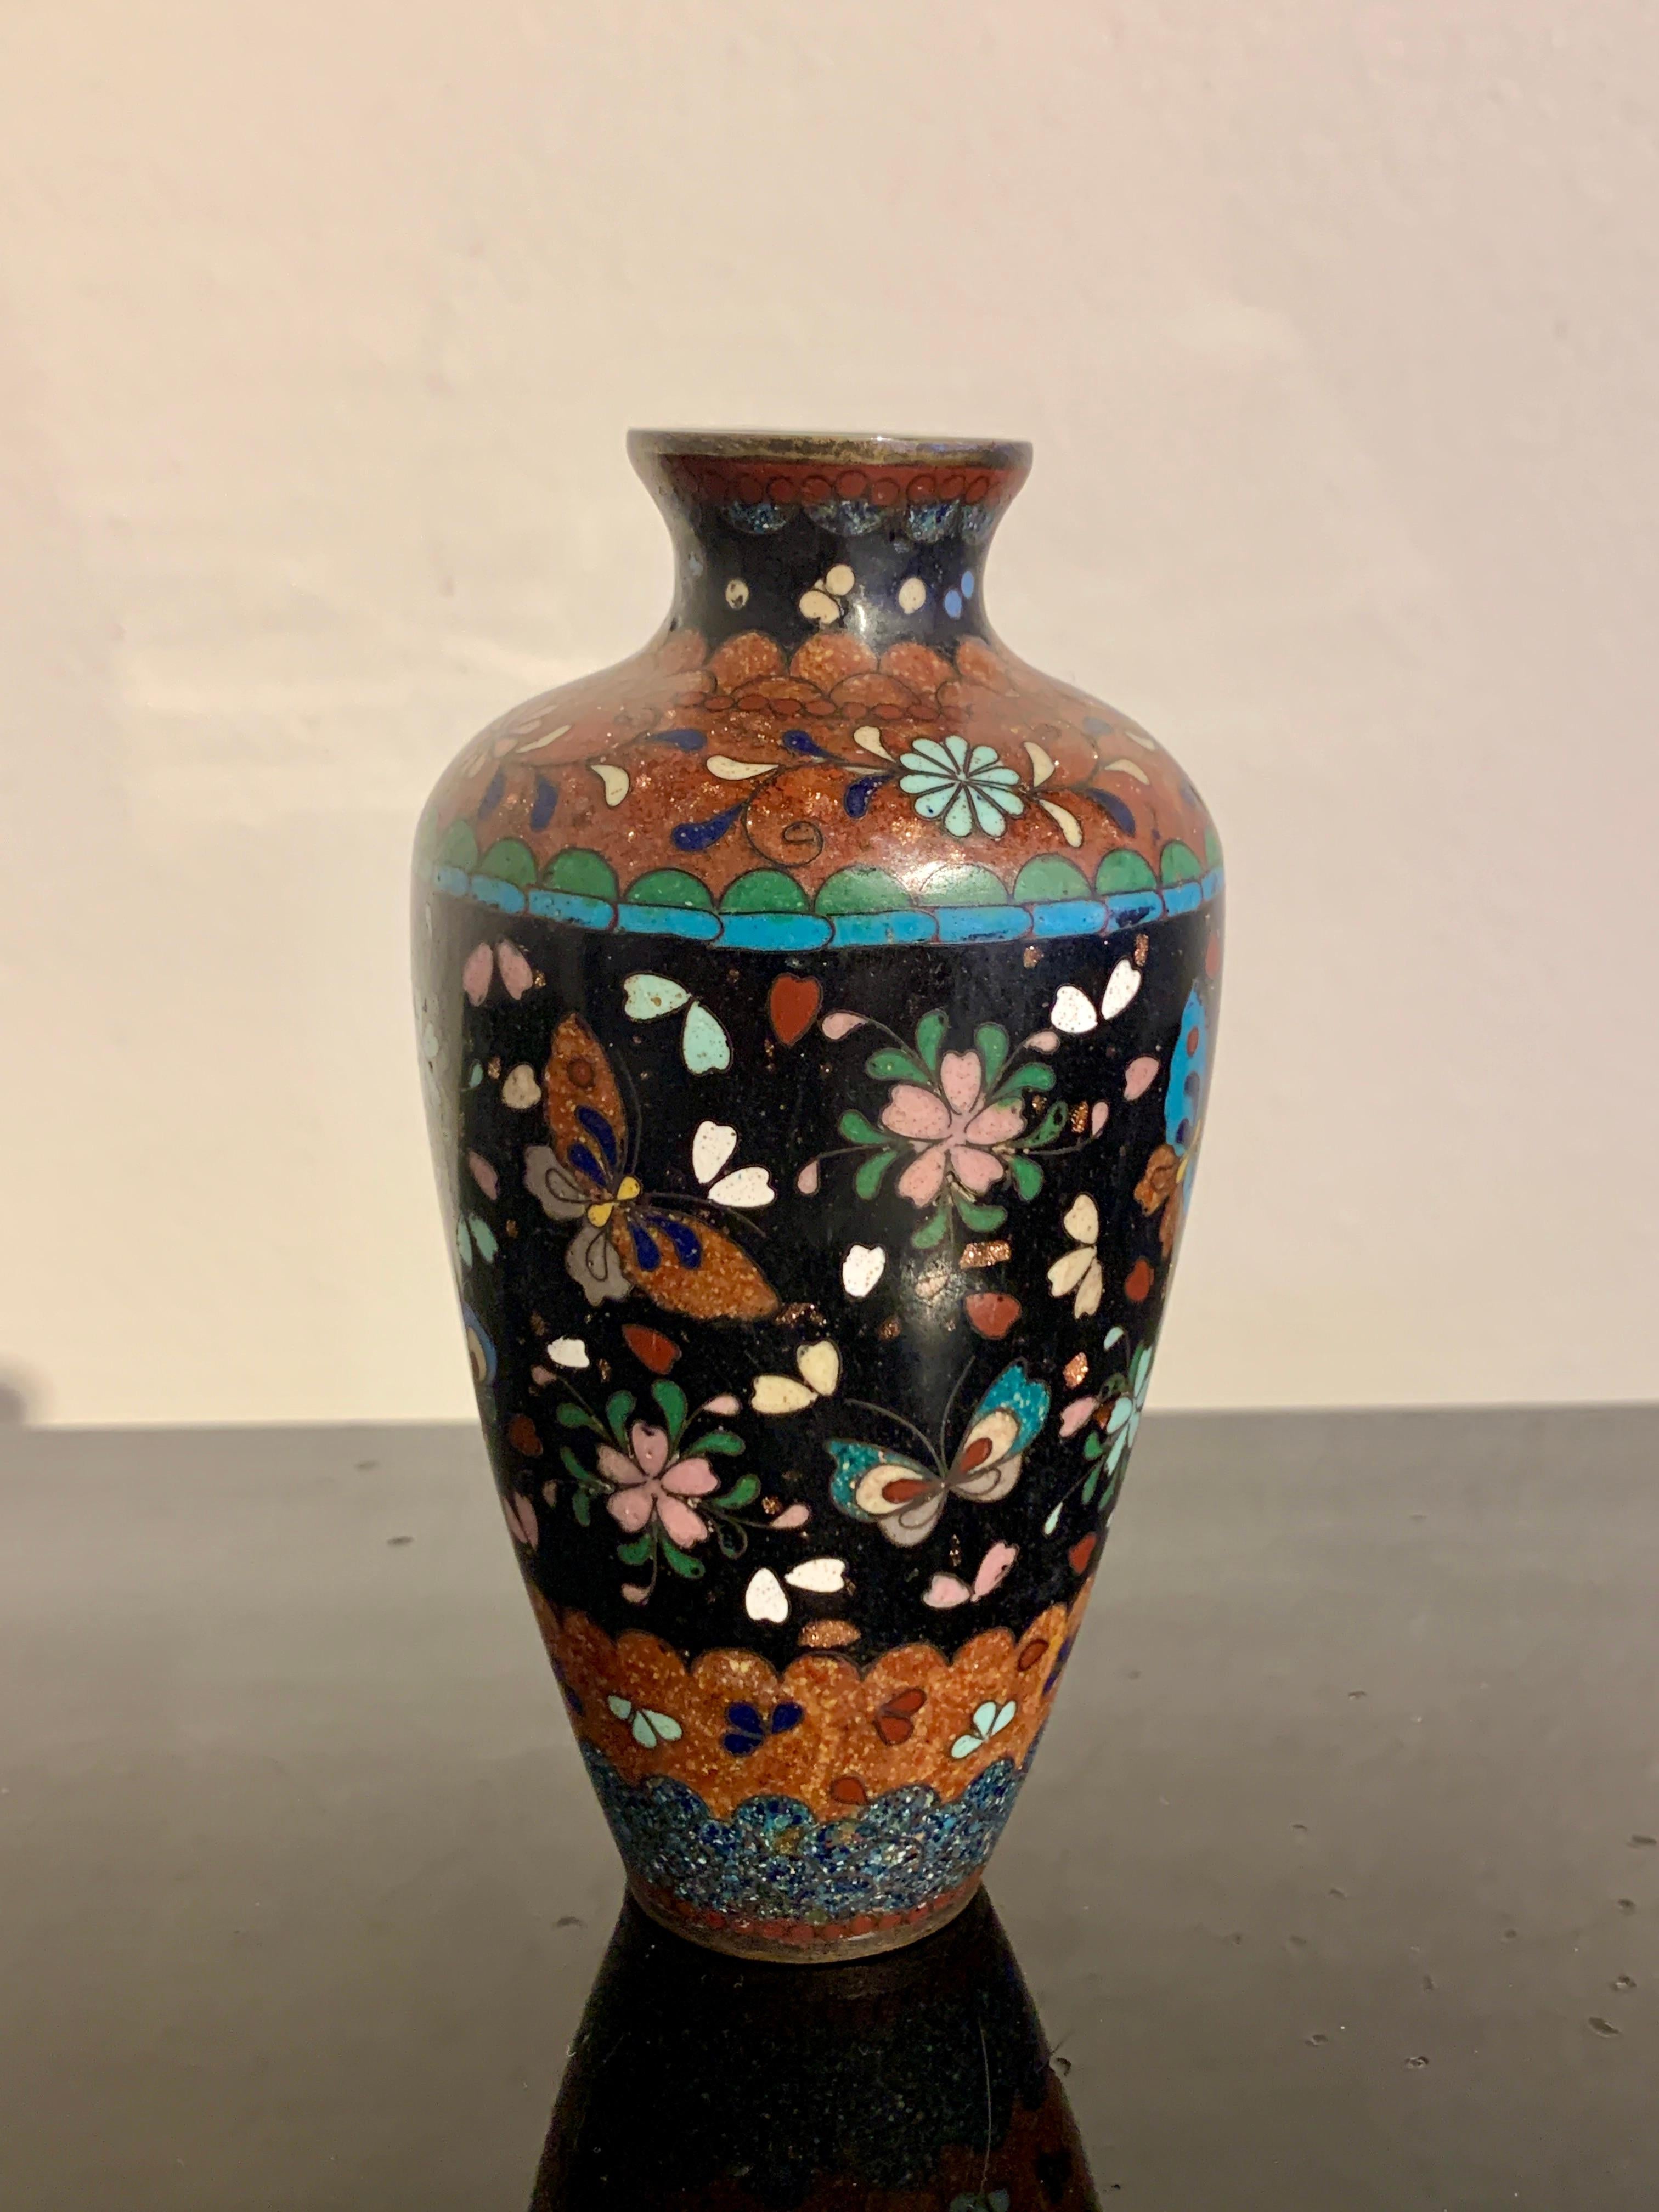 Foil Group of 5 Small Japanese Cloisonne and Ginbari Vases, Early 20th Century, Japan For Sale